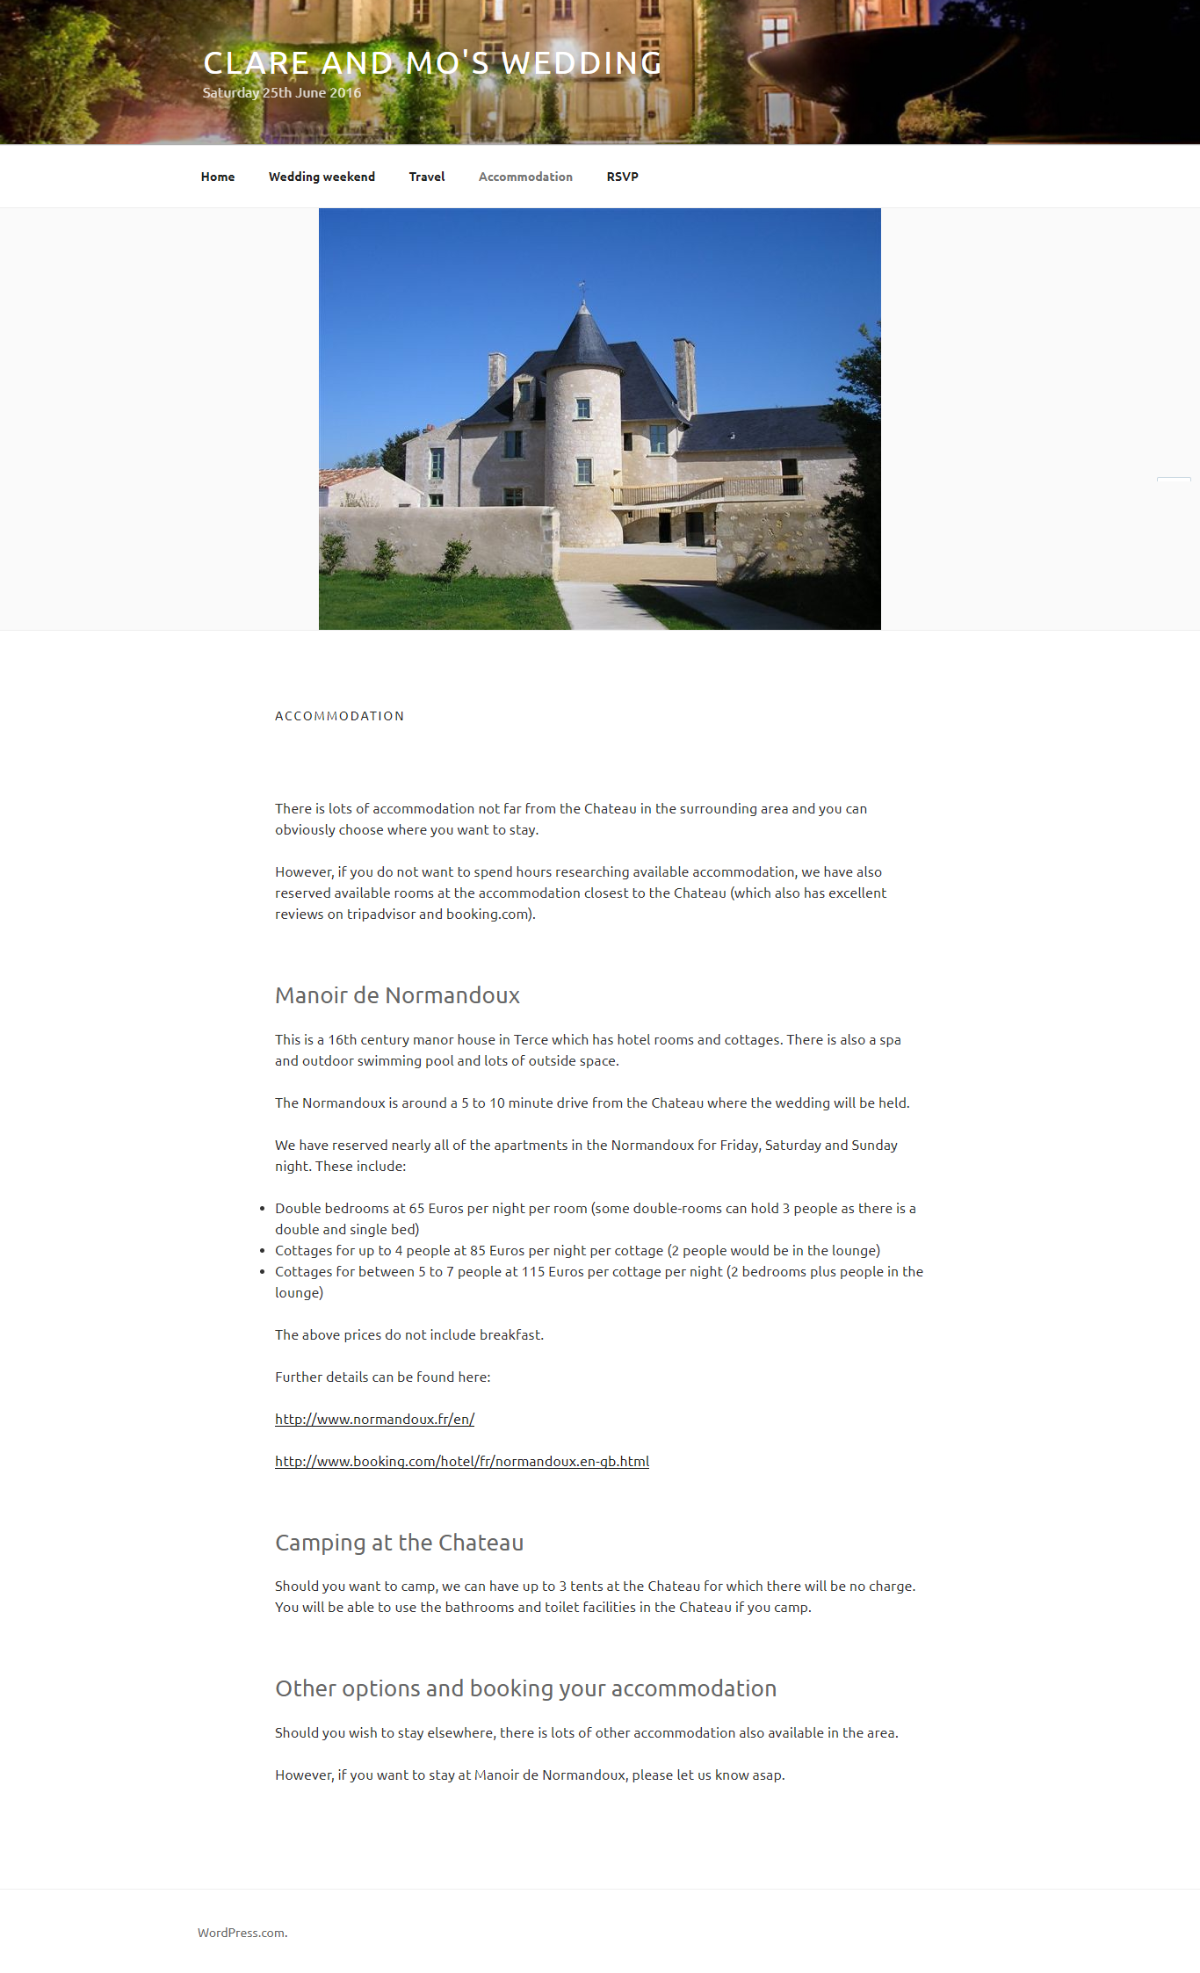 The "Accommodation" page with all the info for guests.